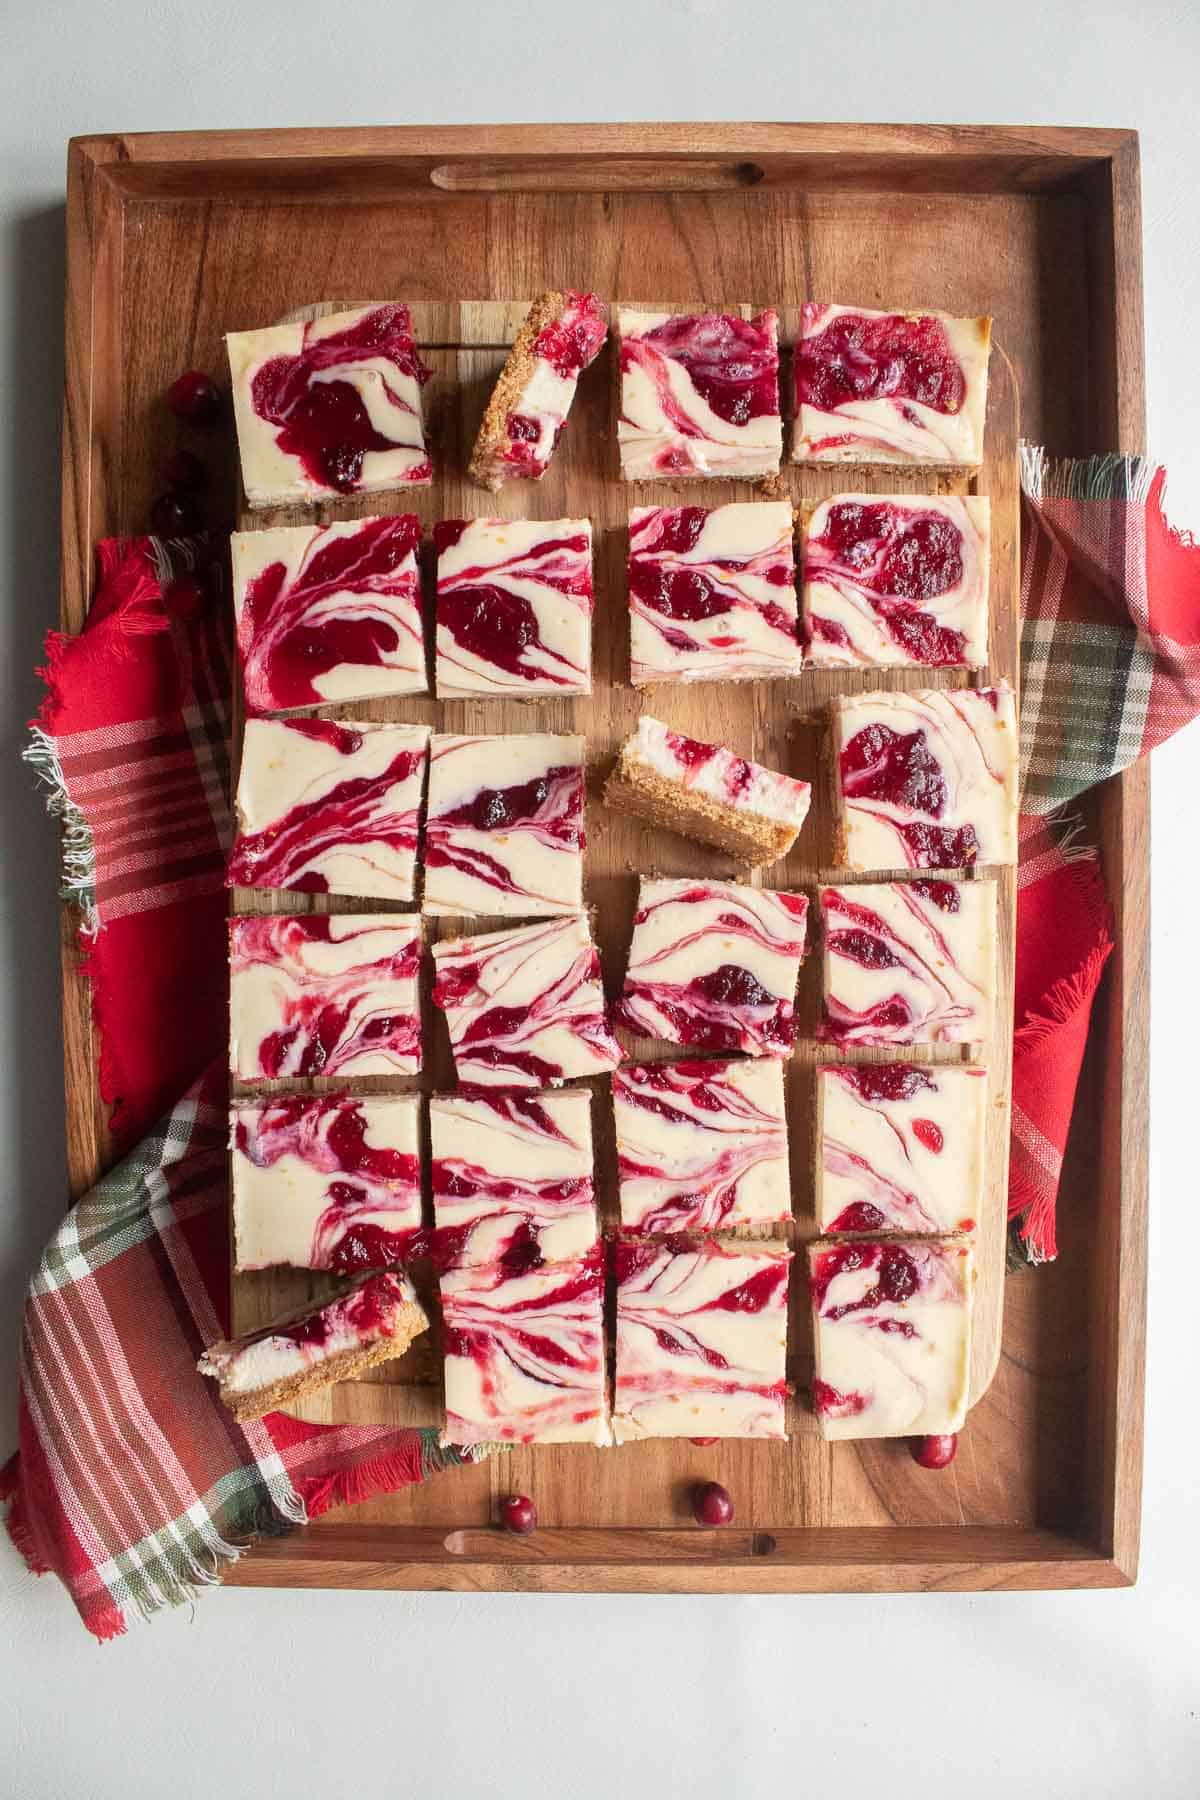 Marbled red and white cheesecake bars arranged on a wooden cutting board over a red and green plaid cloth.